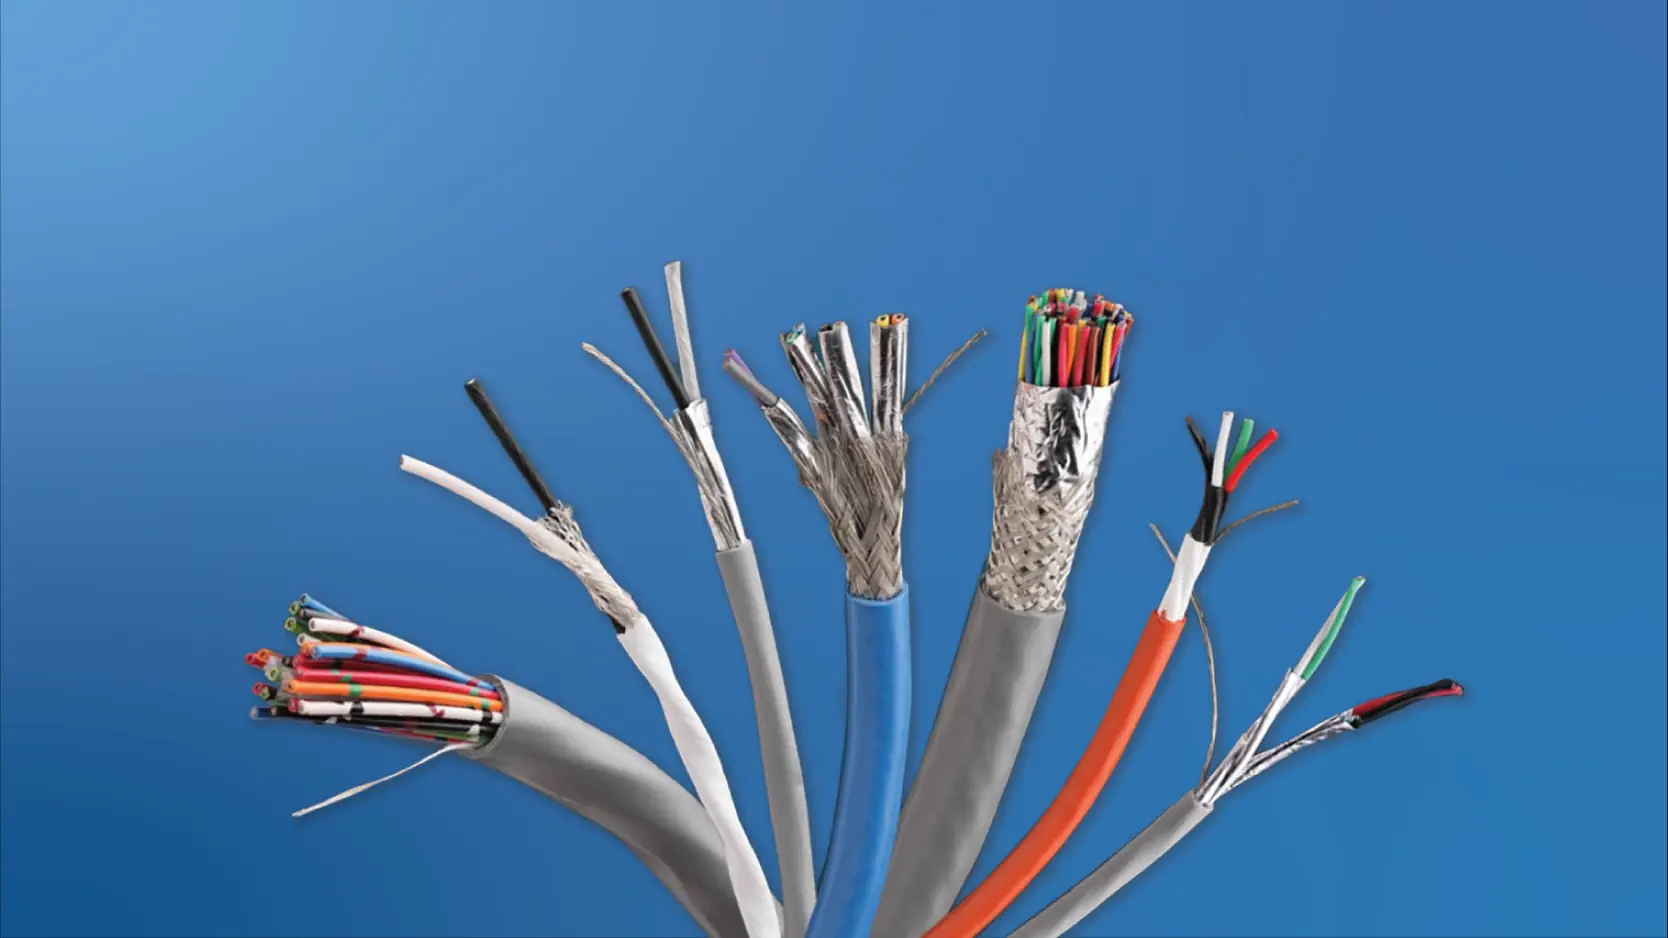 Texcan - About Us - Suppliers - Belden - Multiconductor Cable